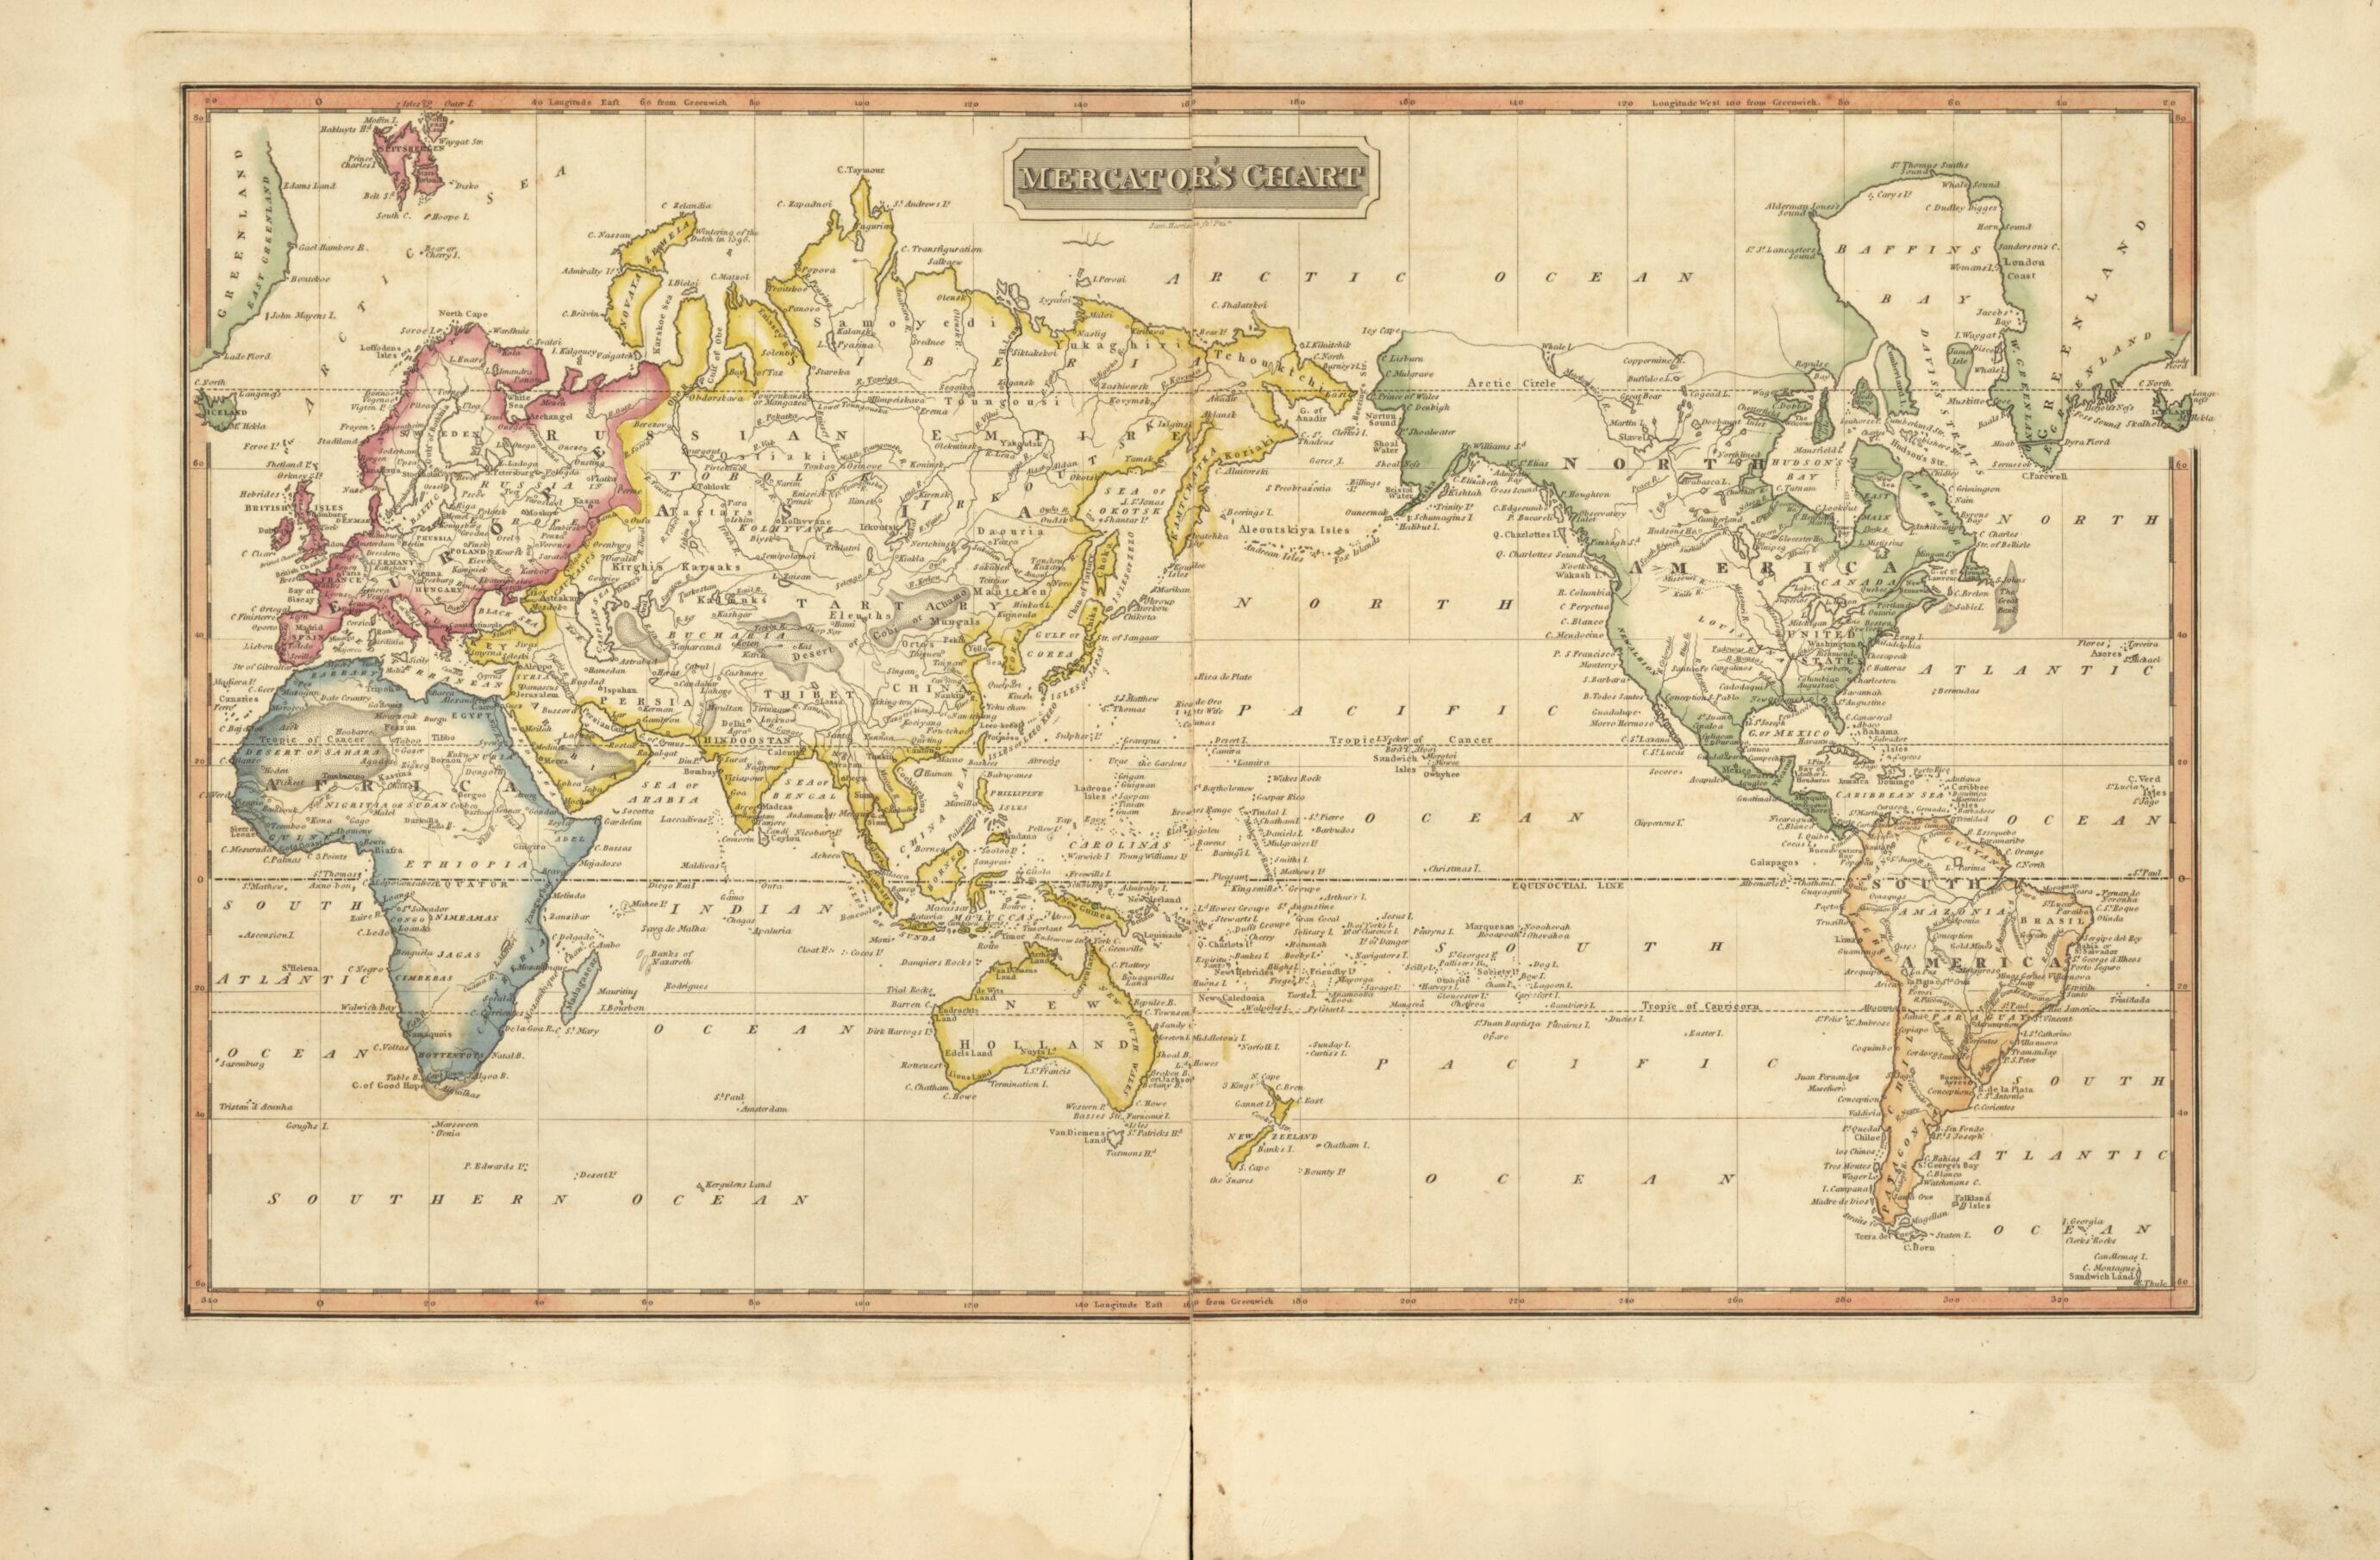 This old map of Mercator&